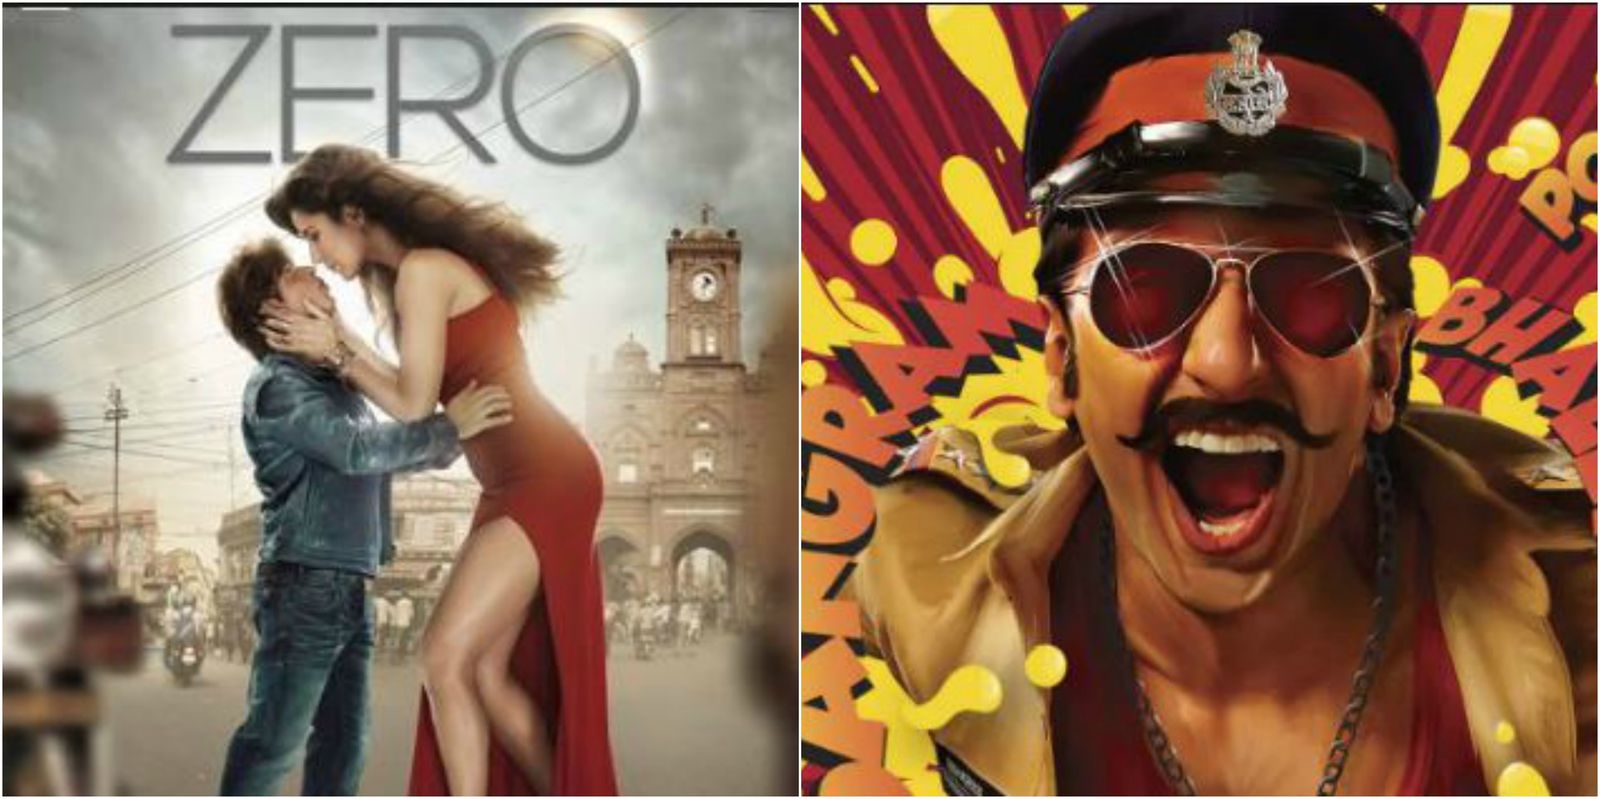  Zero v/s Simmba Is Bringing Back 3 Year Old Memories: Will History Repeat Itself?